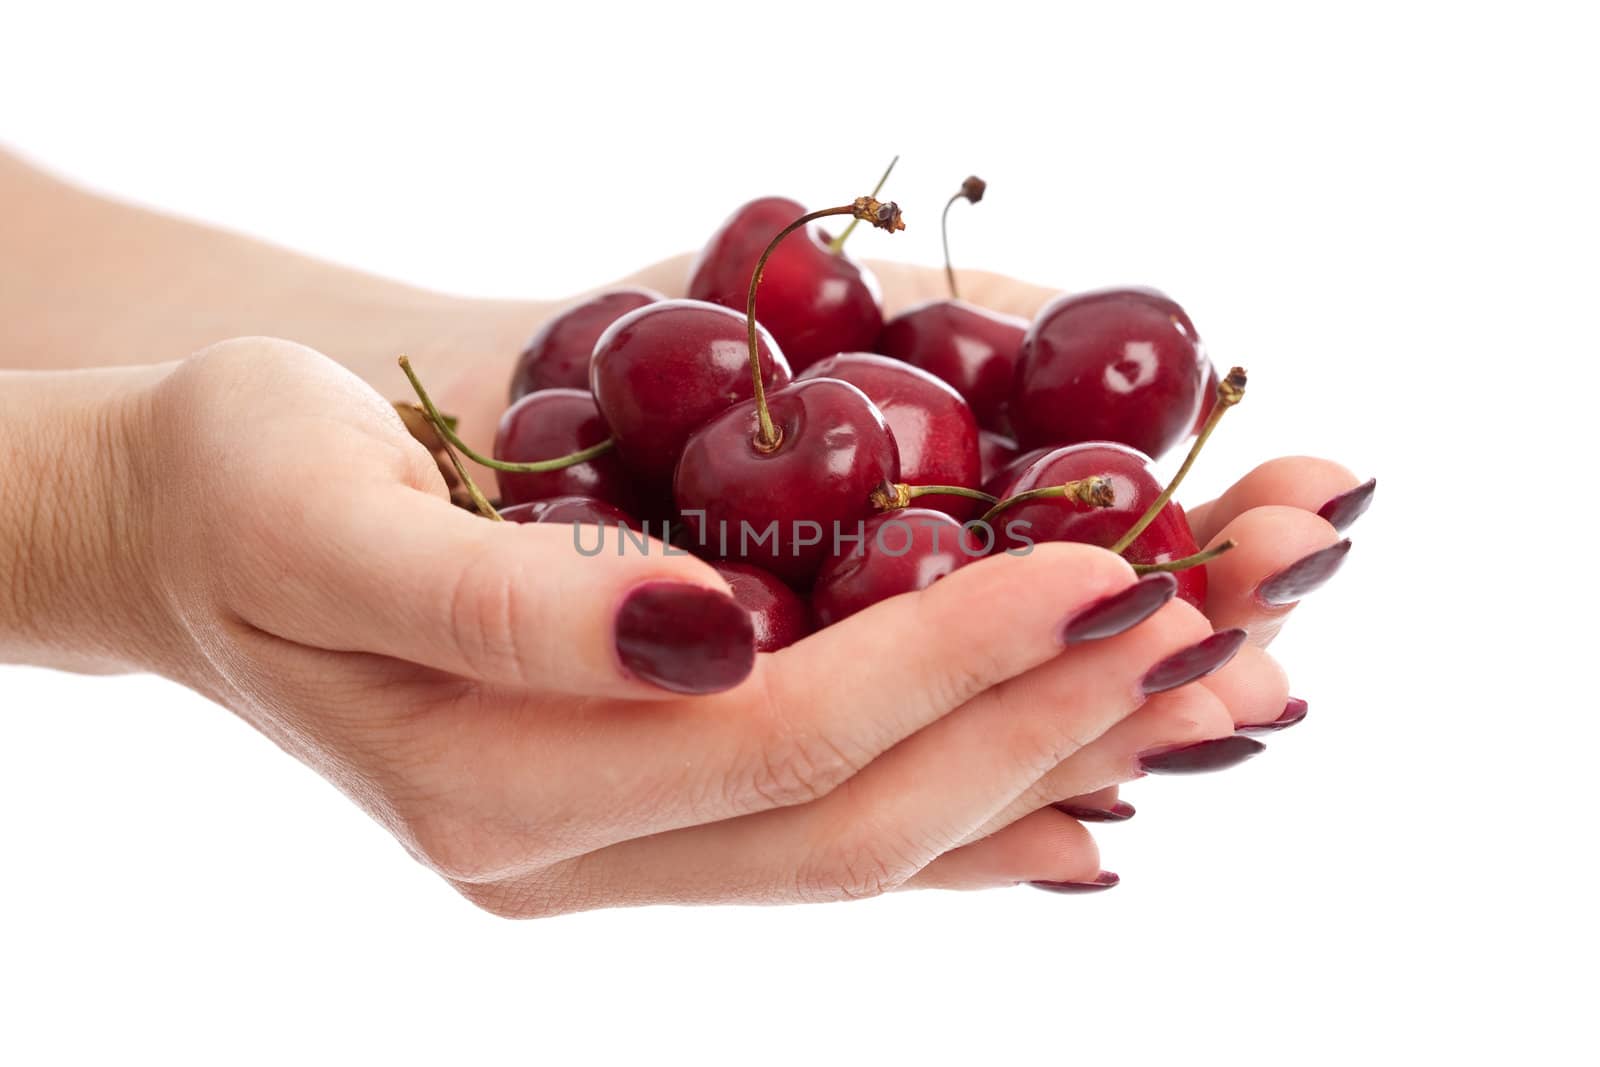 Hands ful of fresh berries by Fotosmurf